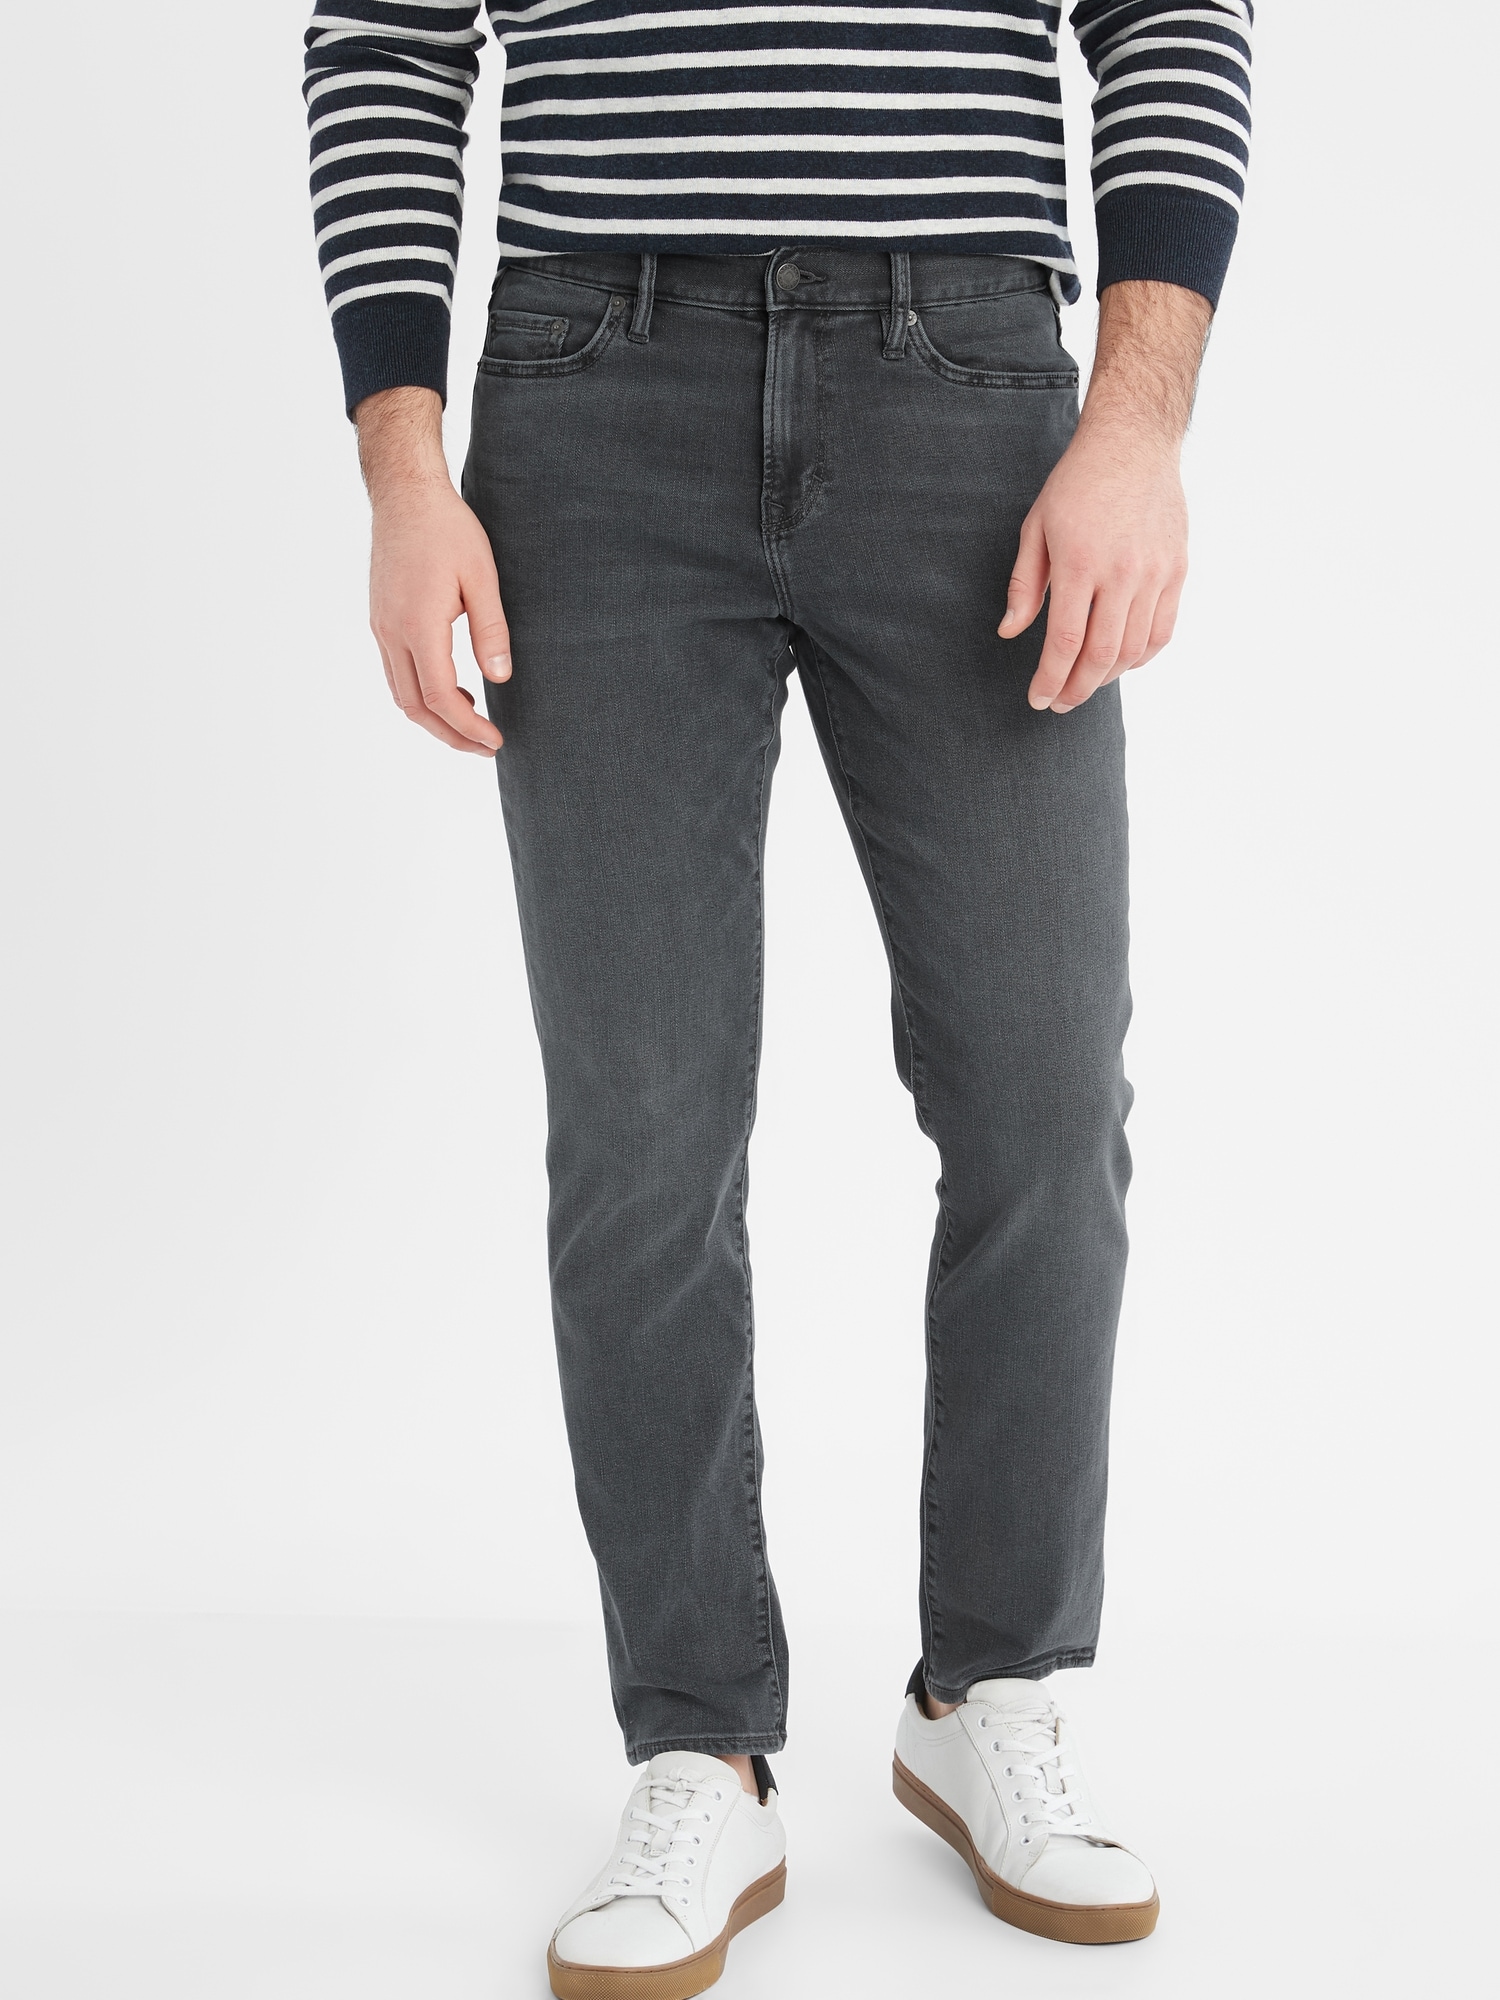 Athletic-Fit Grey Wash Travel Jean